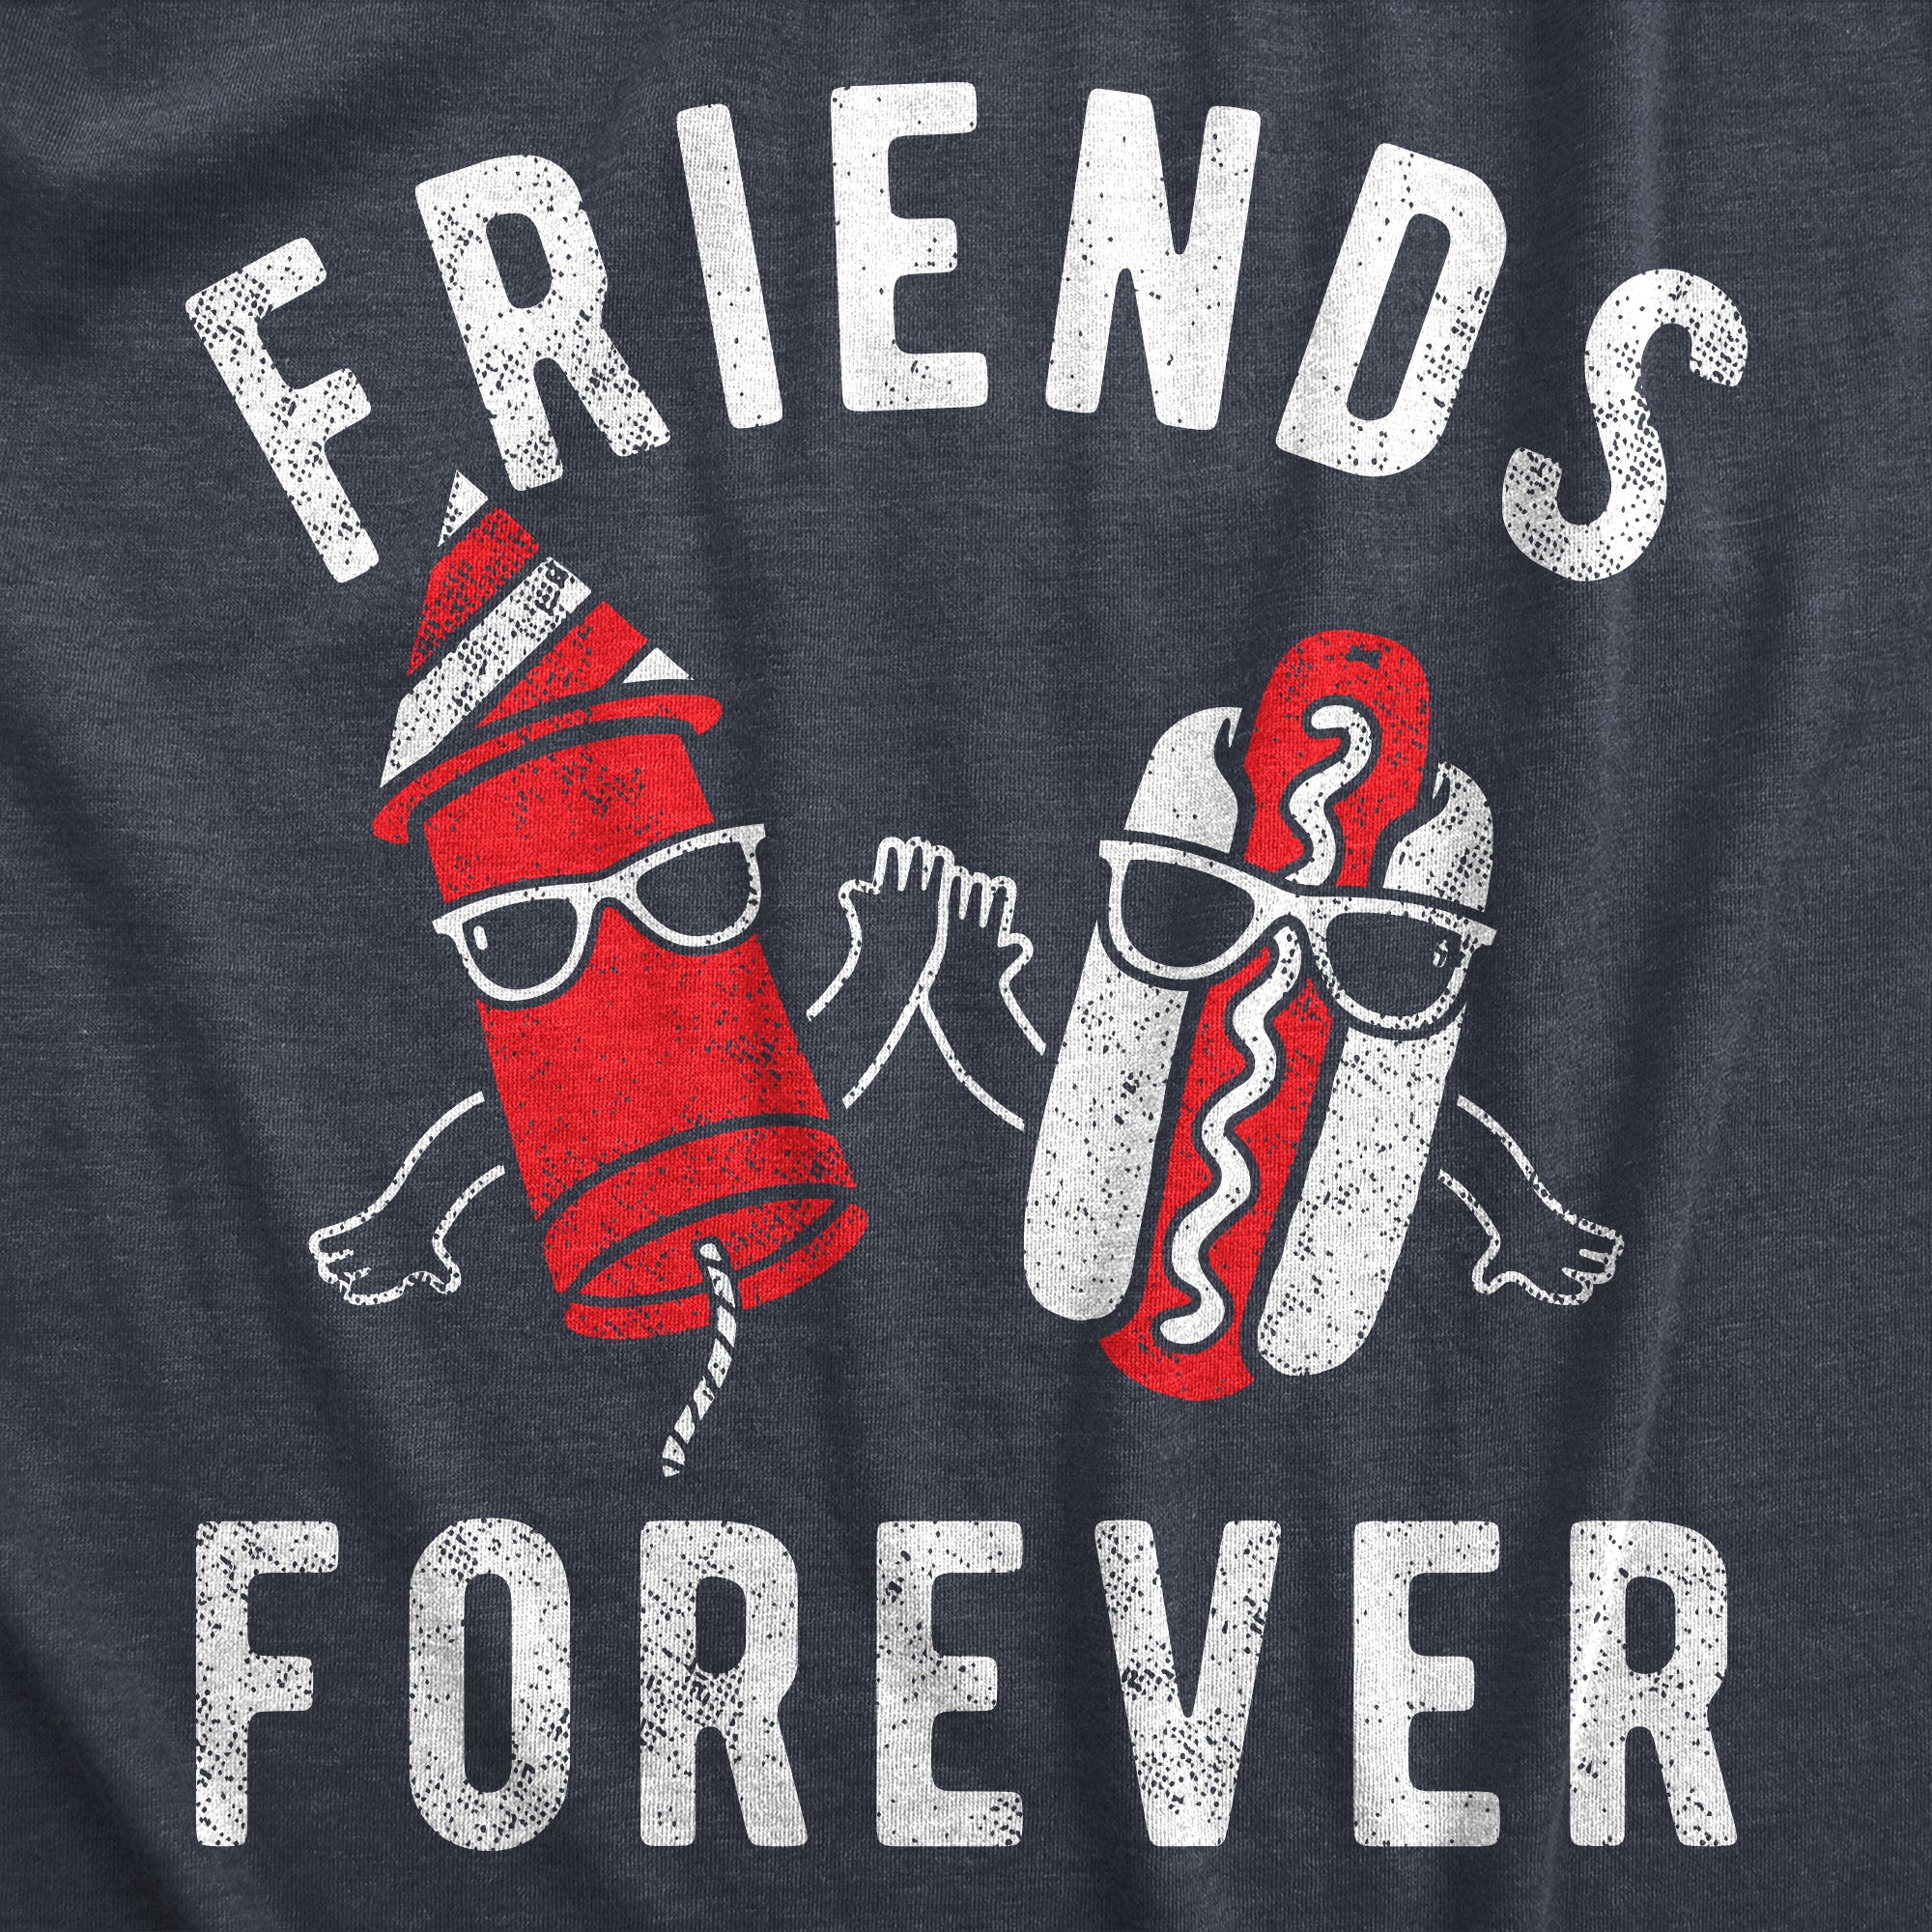 Funny Heather Navy - FRIENDS Friends Forever Firecracker Hot Dog Mens T Shirt Nerdy Fourth Of July Sarcastic Tee